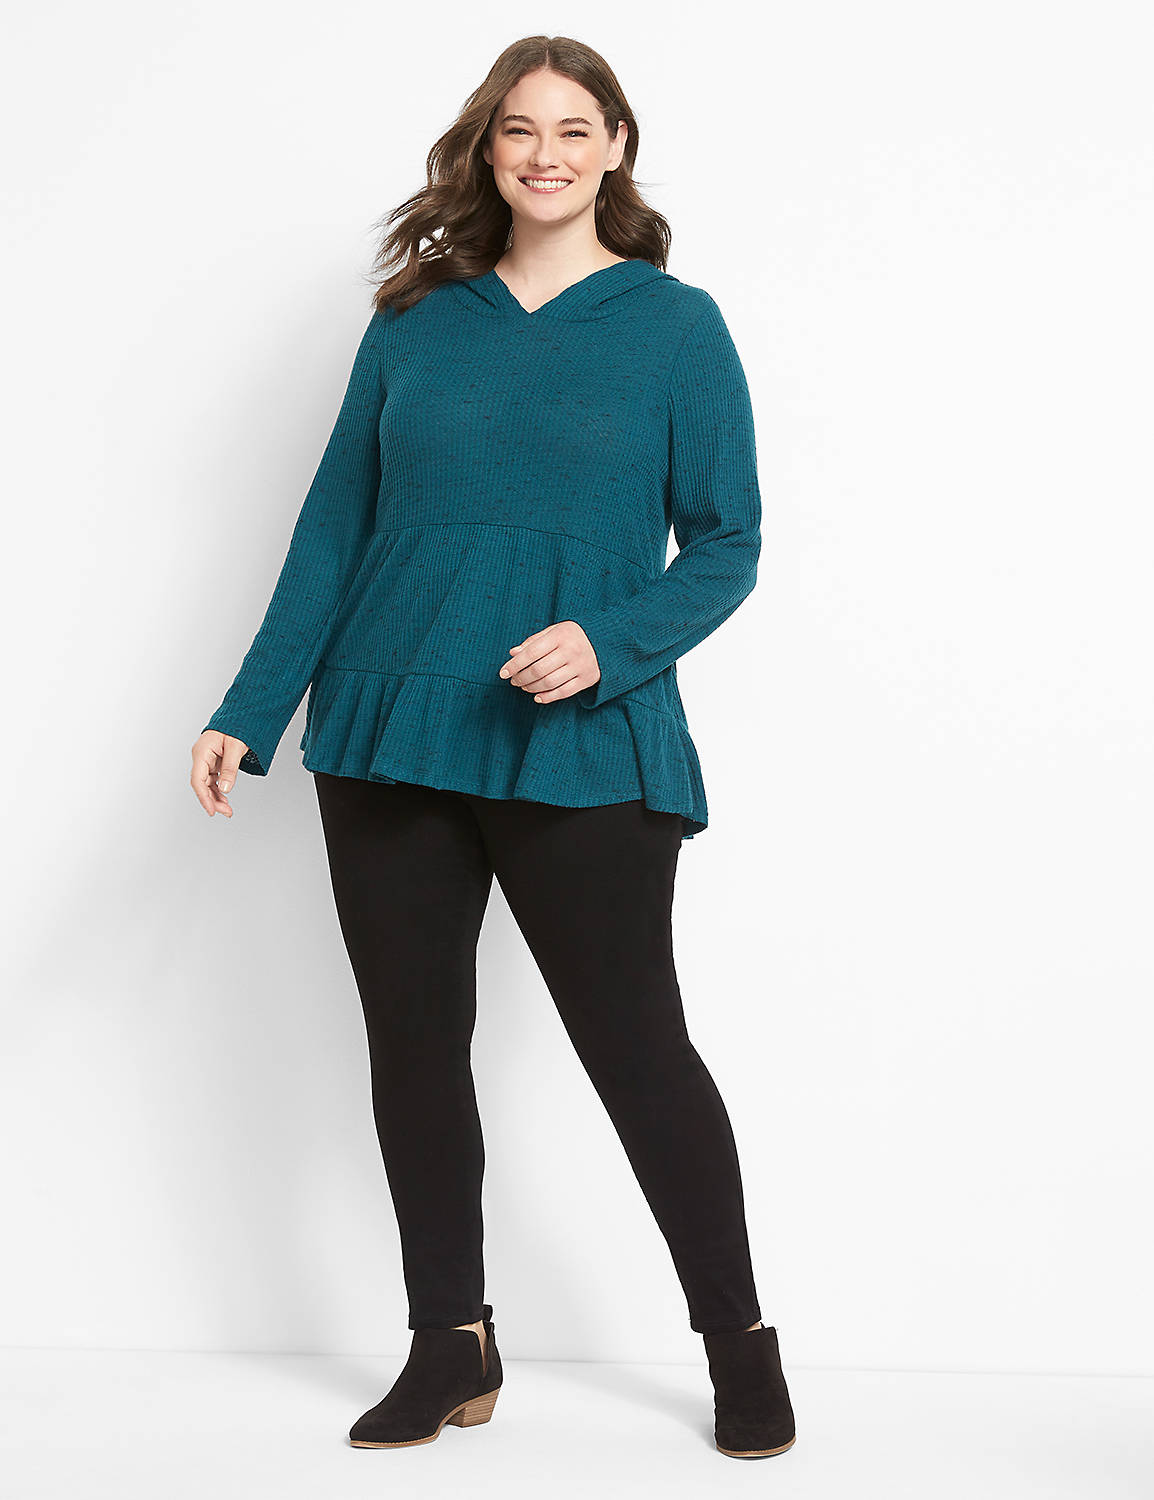 Long Sleeve Hooded Tiered Tunic Knit Top In Waffle Fabric 1123635:PANTONE Deep Teal:10/12 Product Image 3